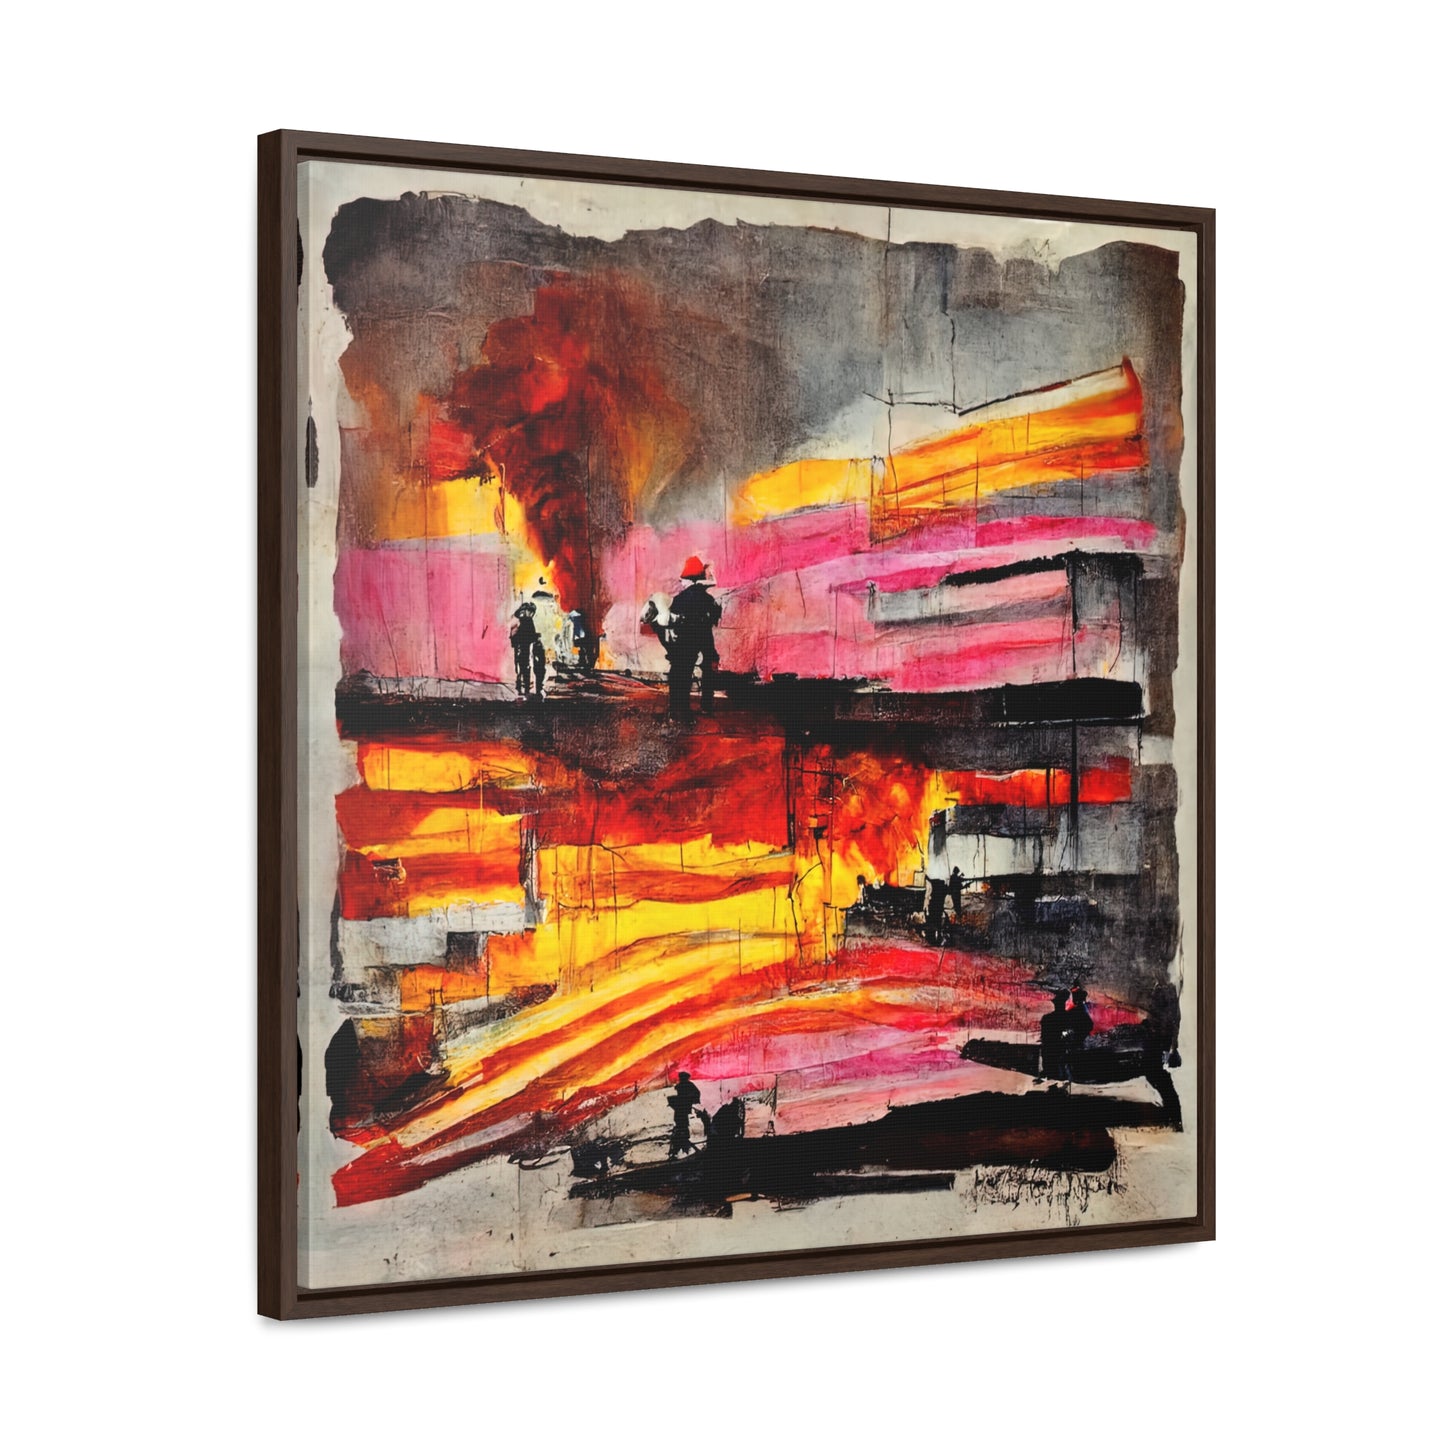 Land of the Sun 2, Valentinii, Gallery Canvas Wraps, Square Frame